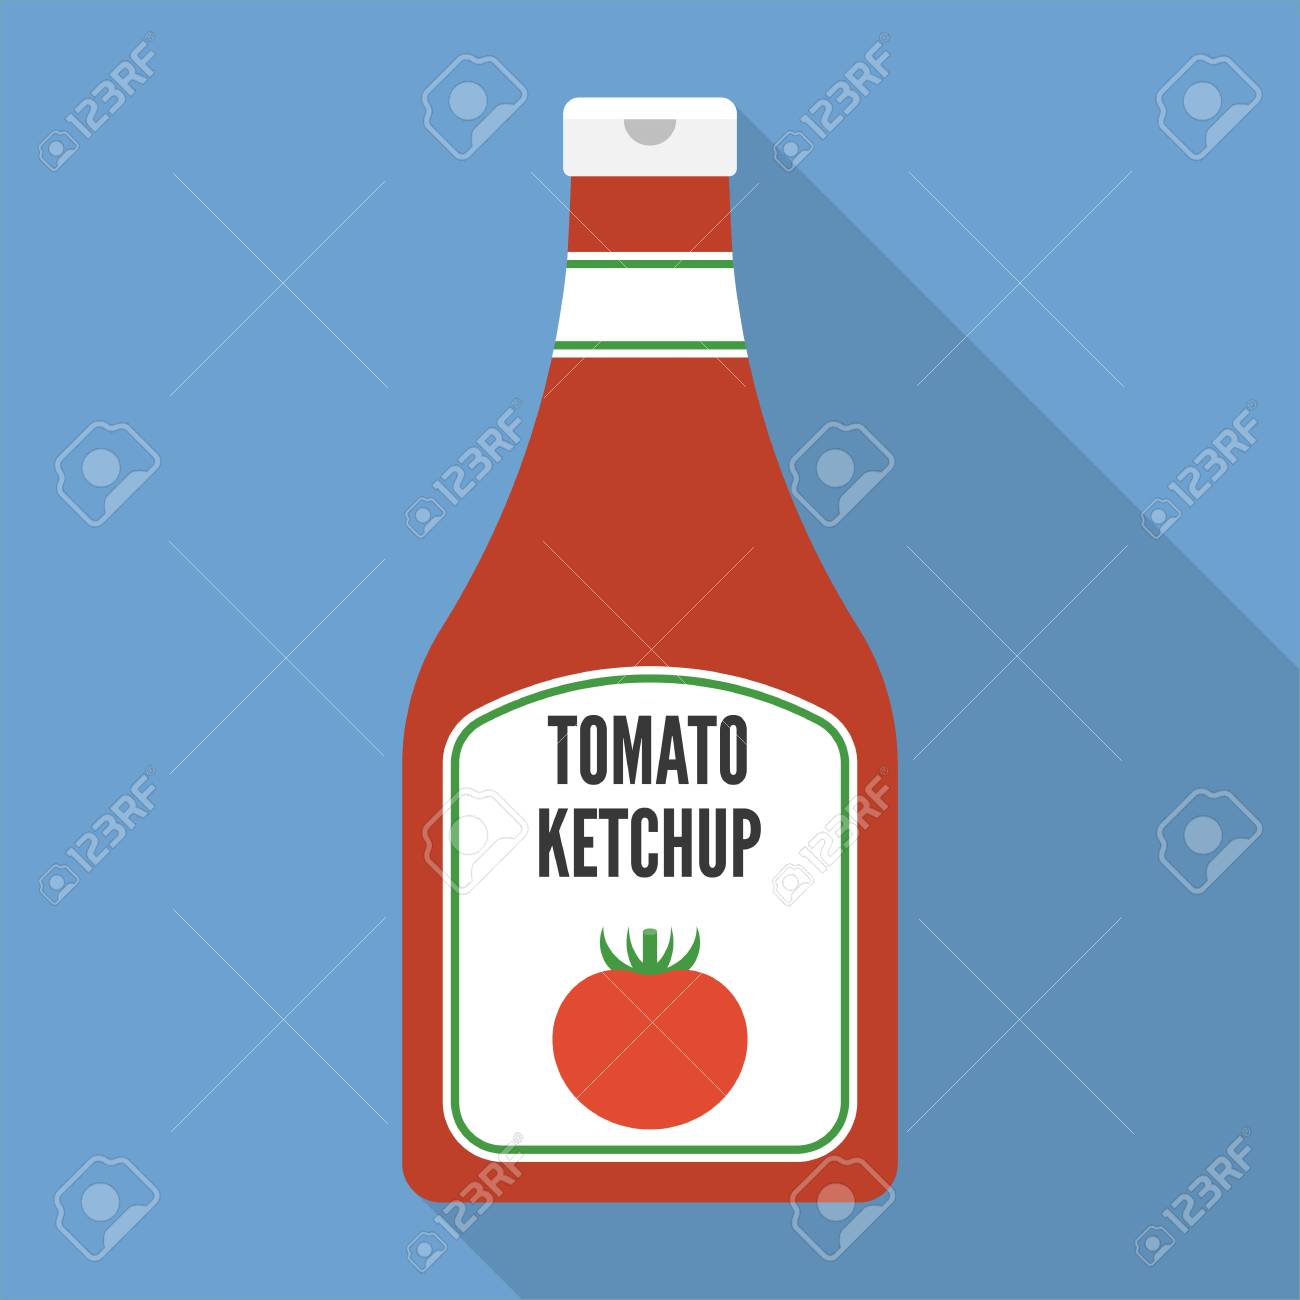 Tomato Ketchup, Sauce Bottle Vector Icon, With Label, Sticker 